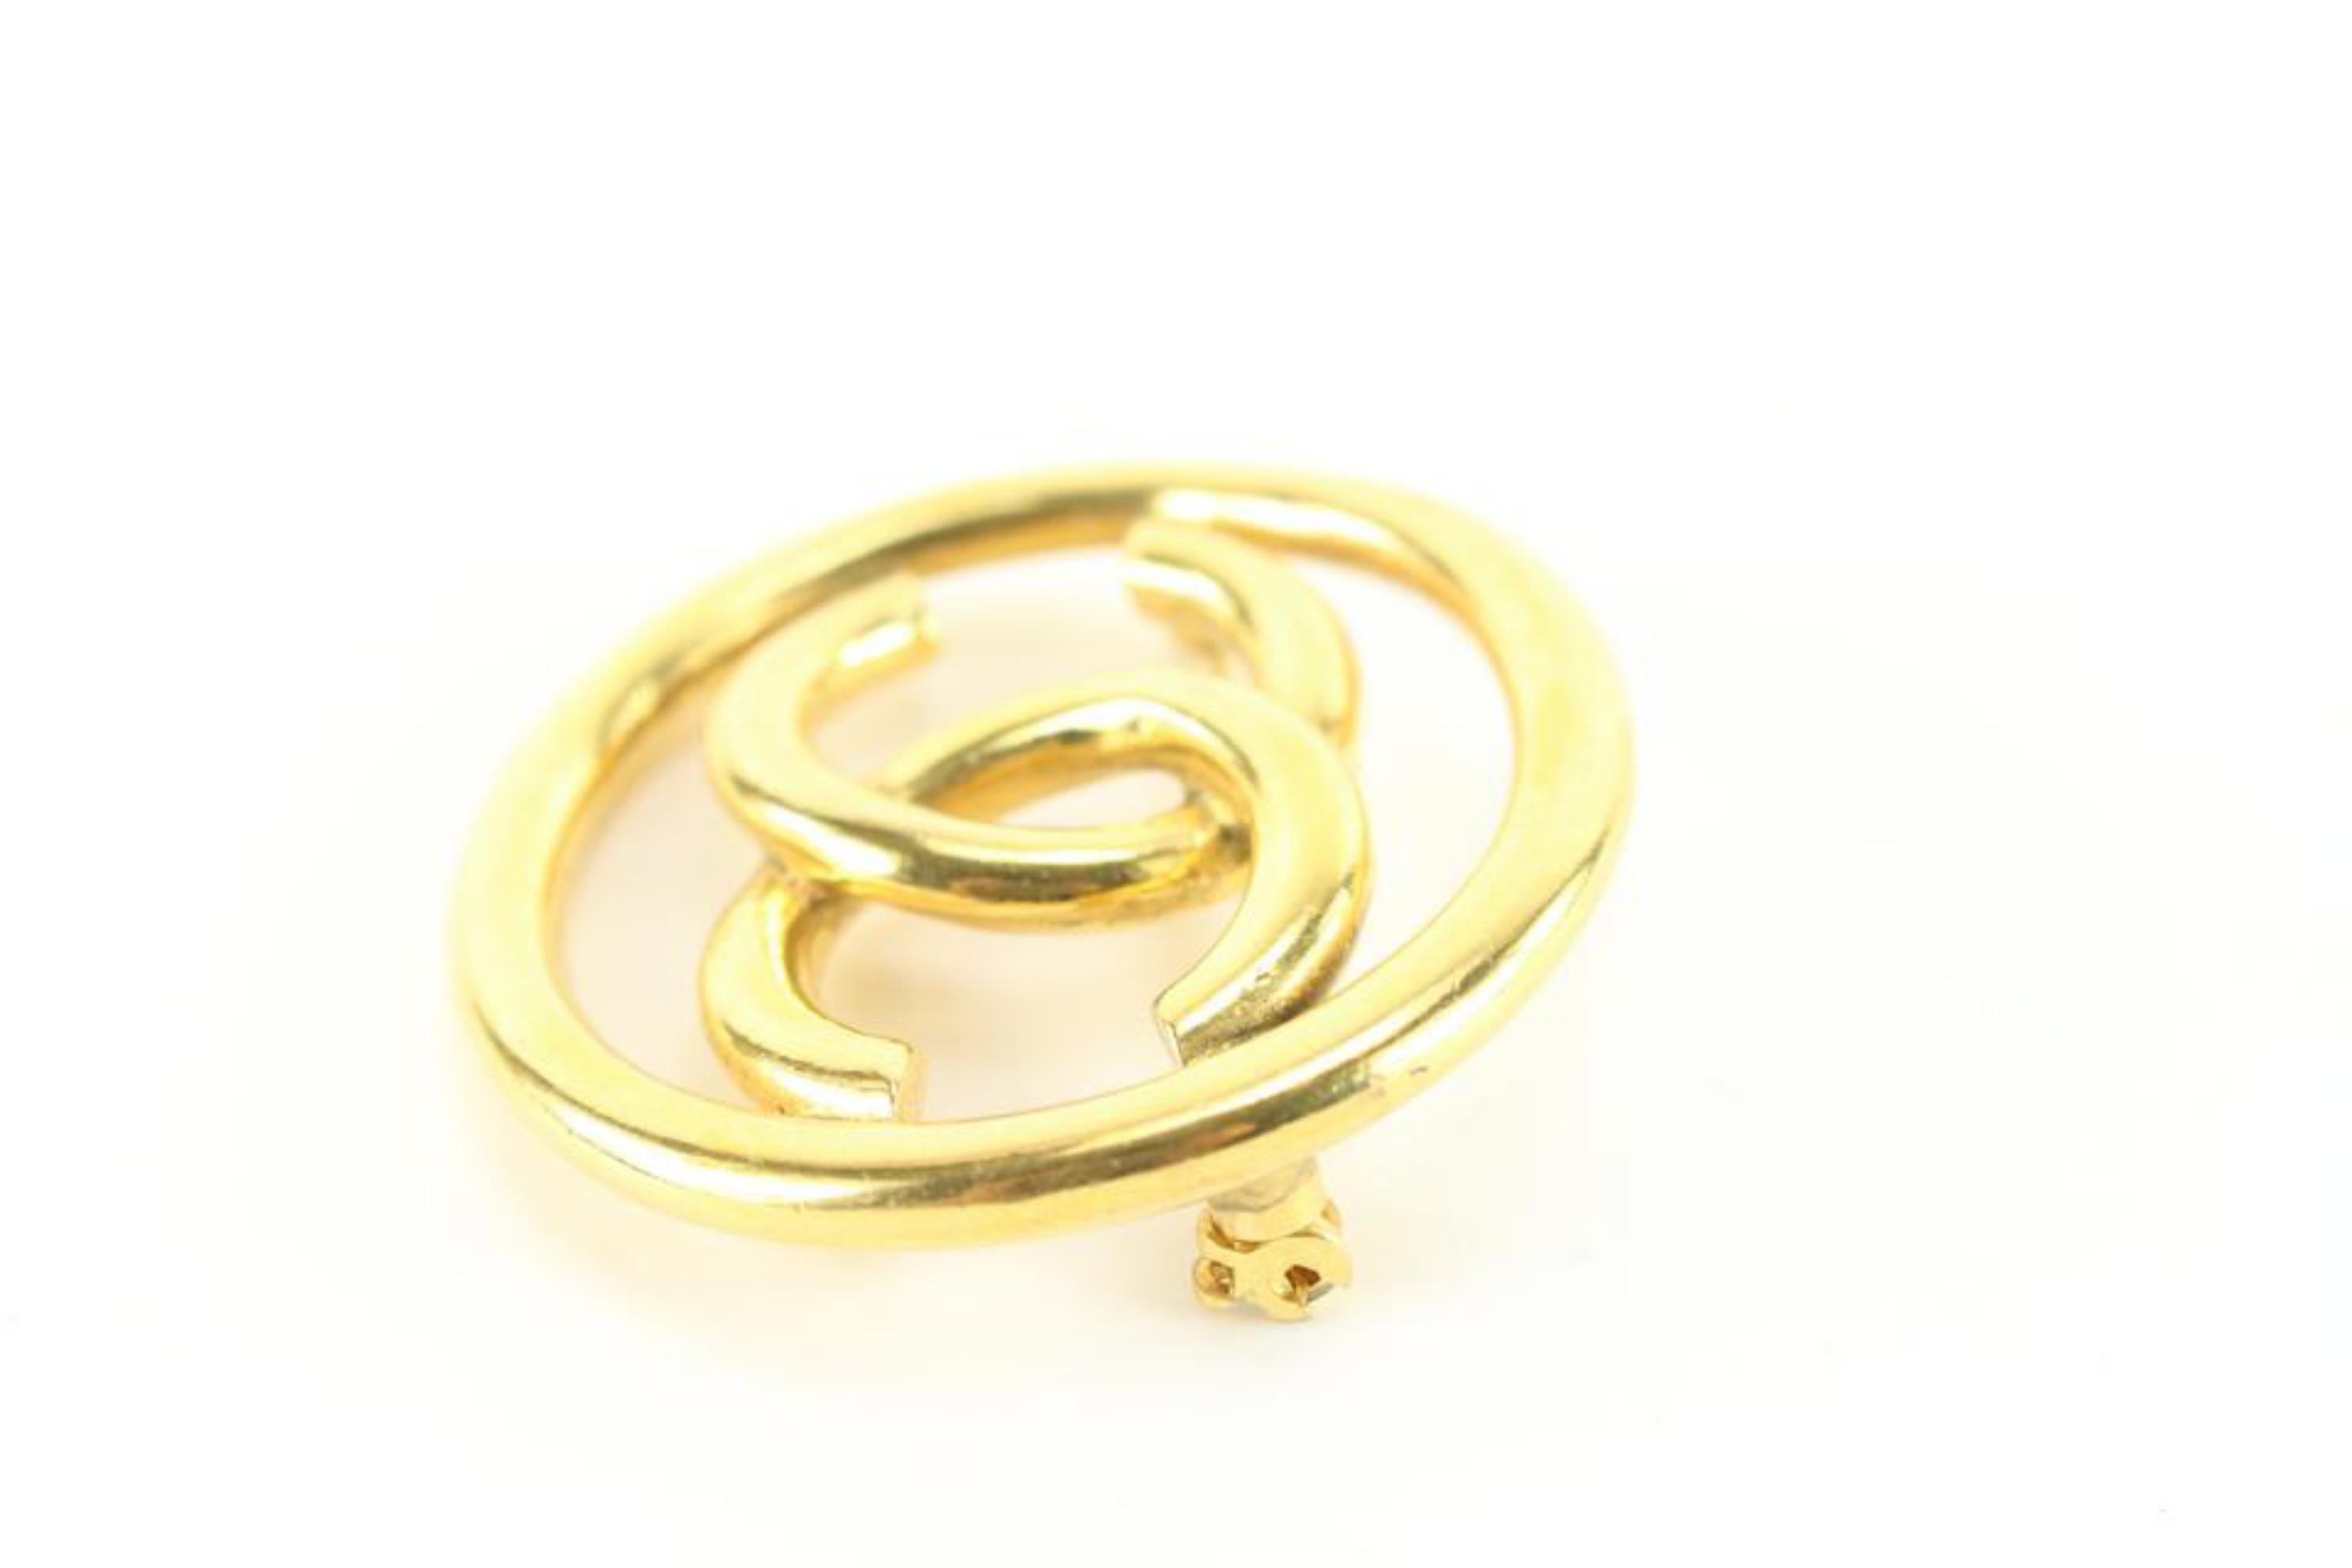 Chanel 93P 24k Gold Plate CC Logo Circle Brooch Pin 31ck824s For Sale 1